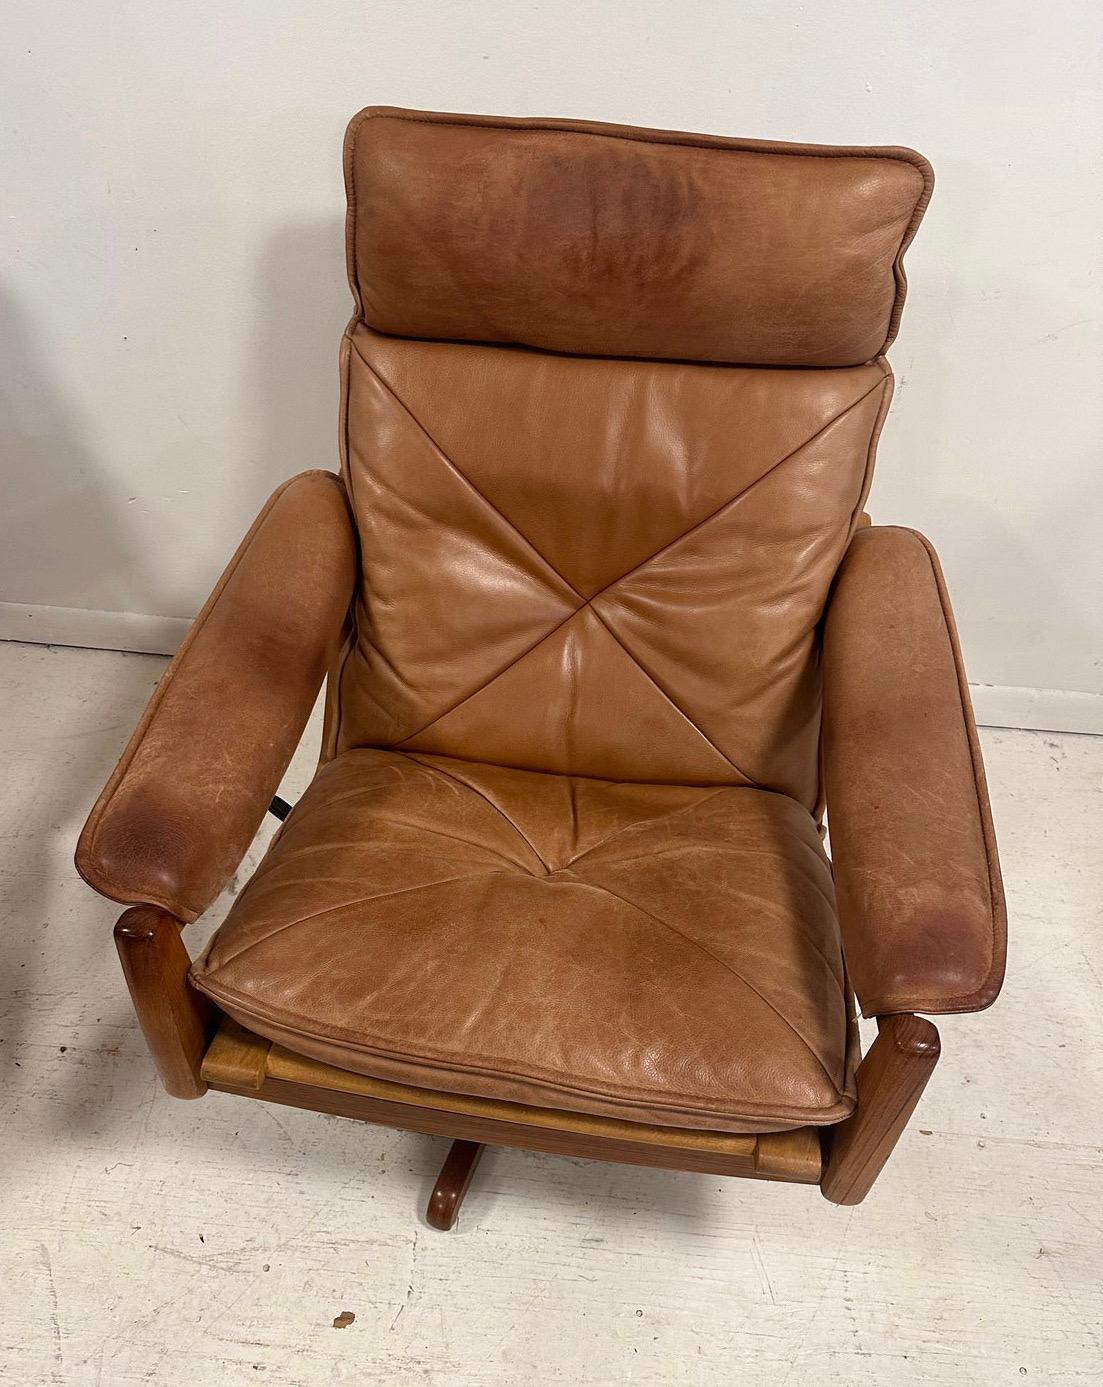 1970s soda galvino Denmark solid teak recliners with ottomans  For Sale 2